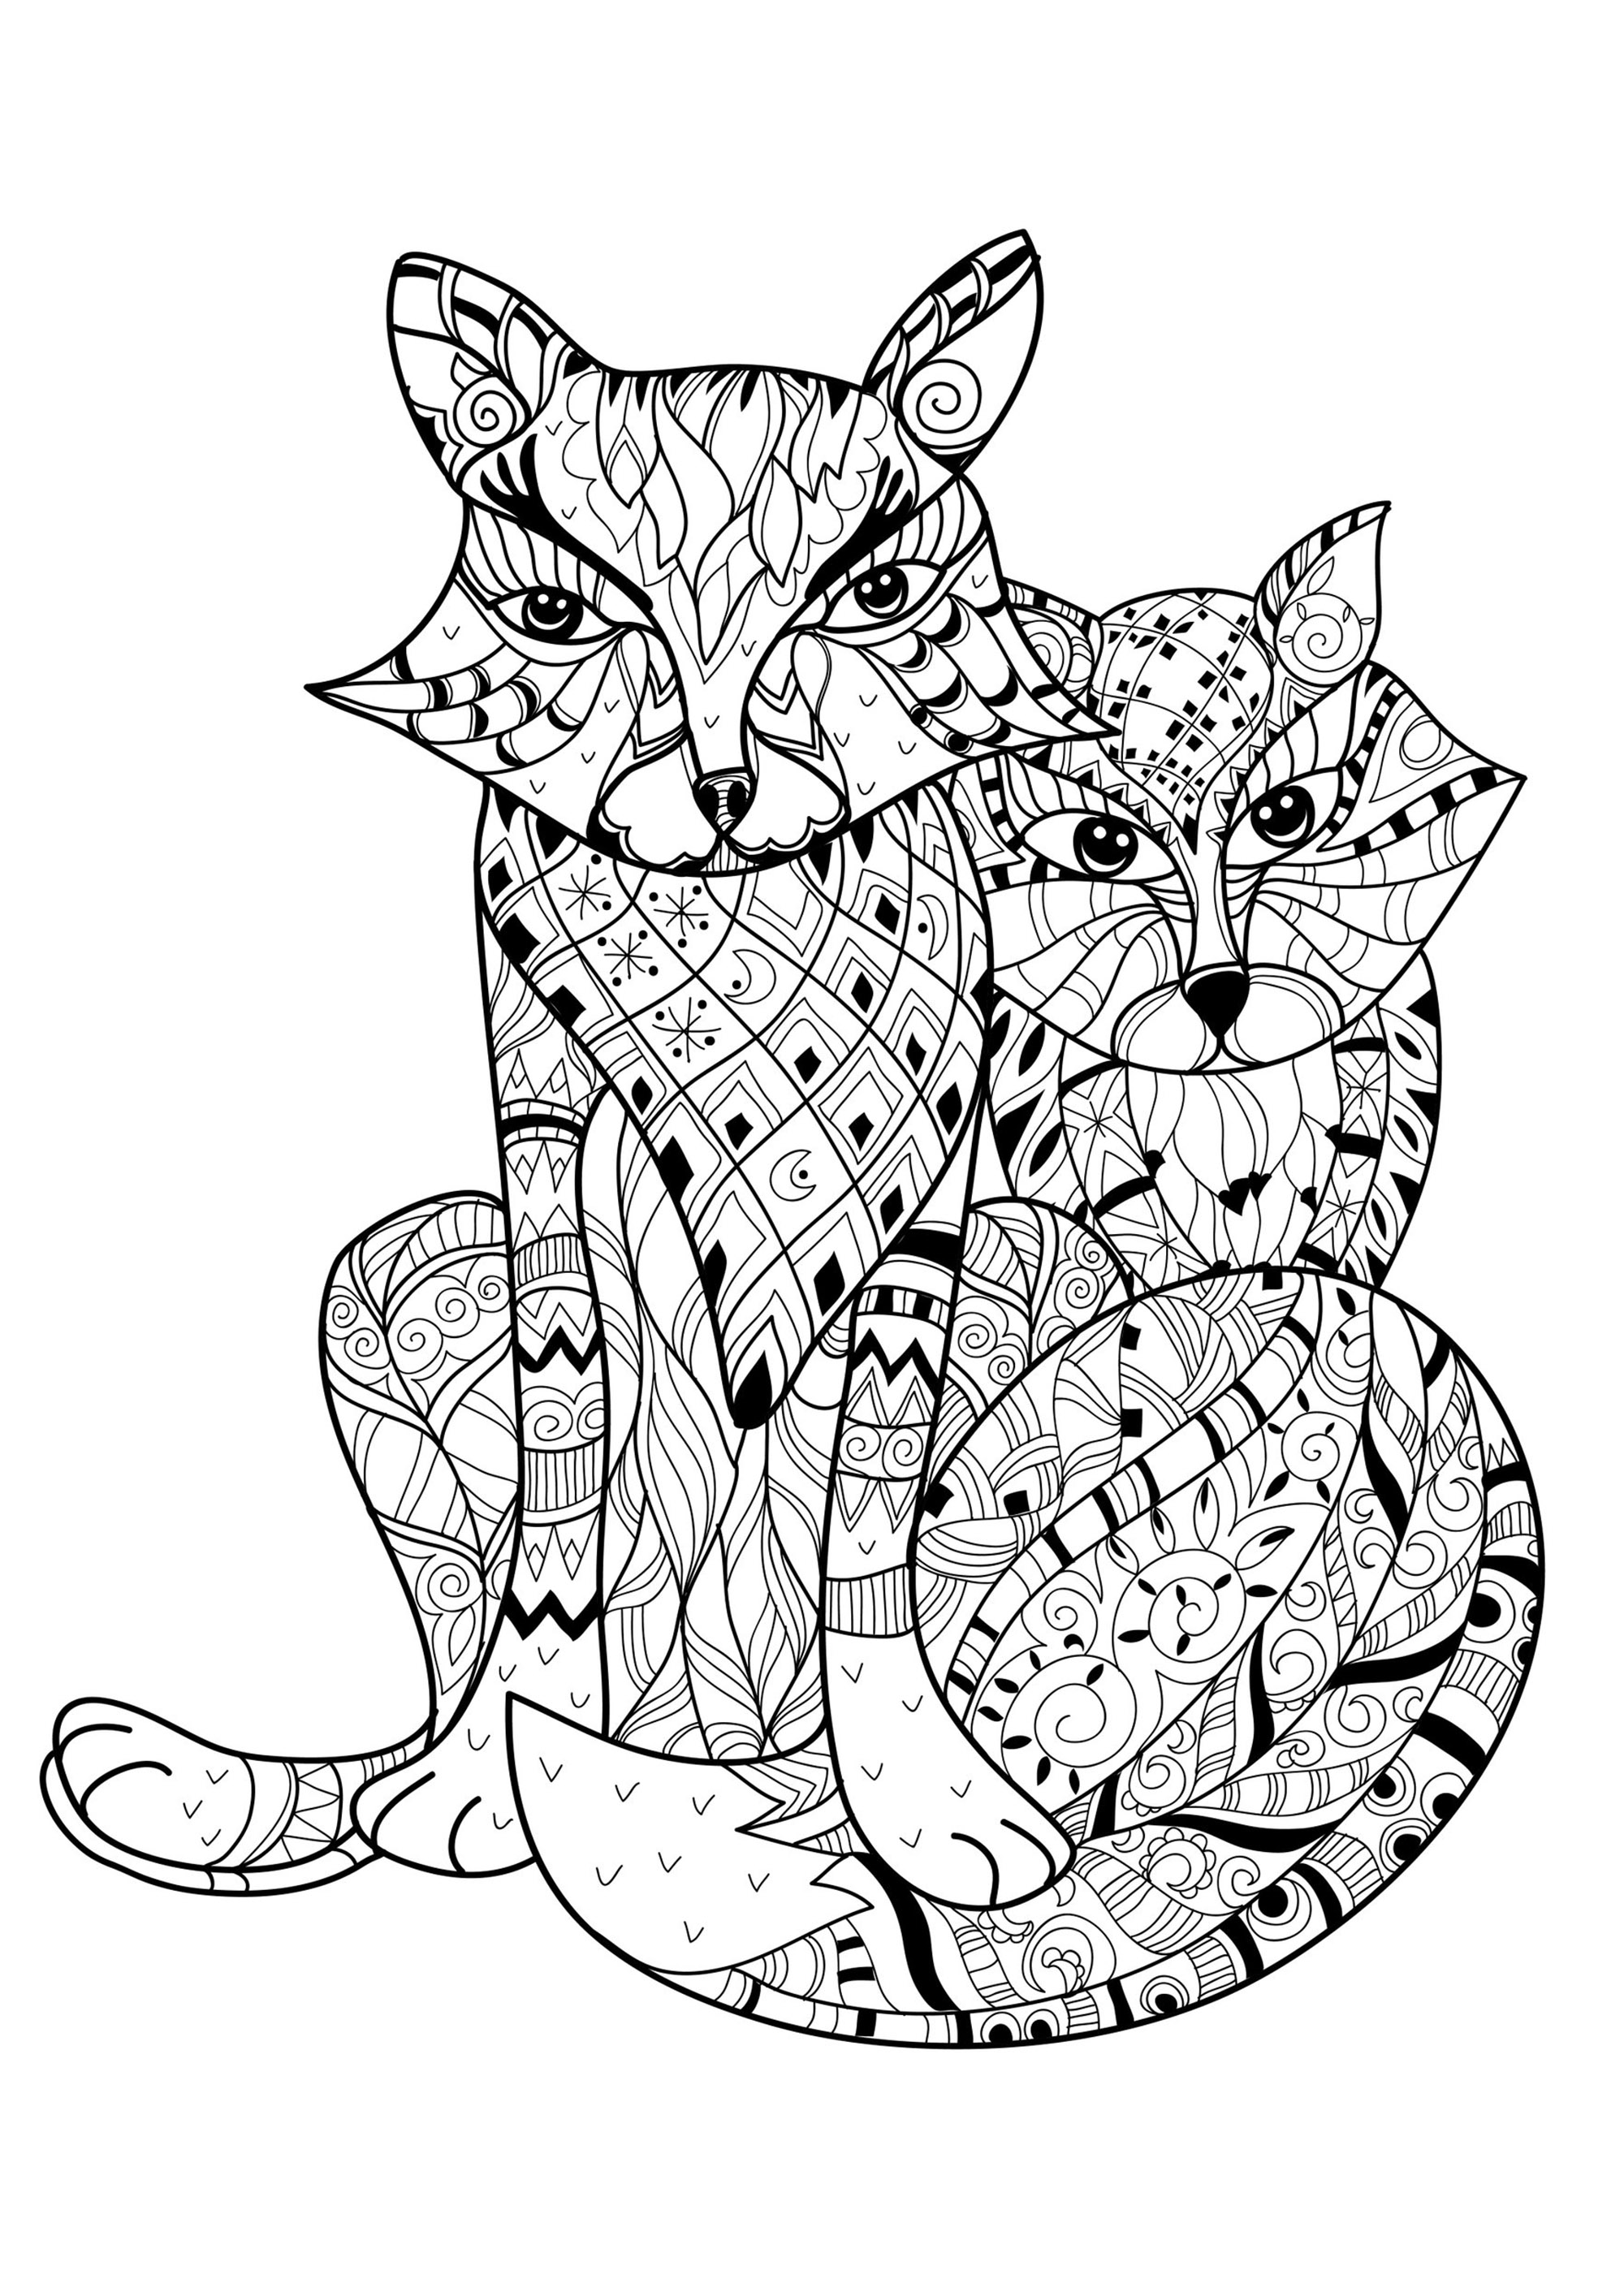 Color these two foxes and their incredible patterns, Artist : Yazzik   Source : 123rf